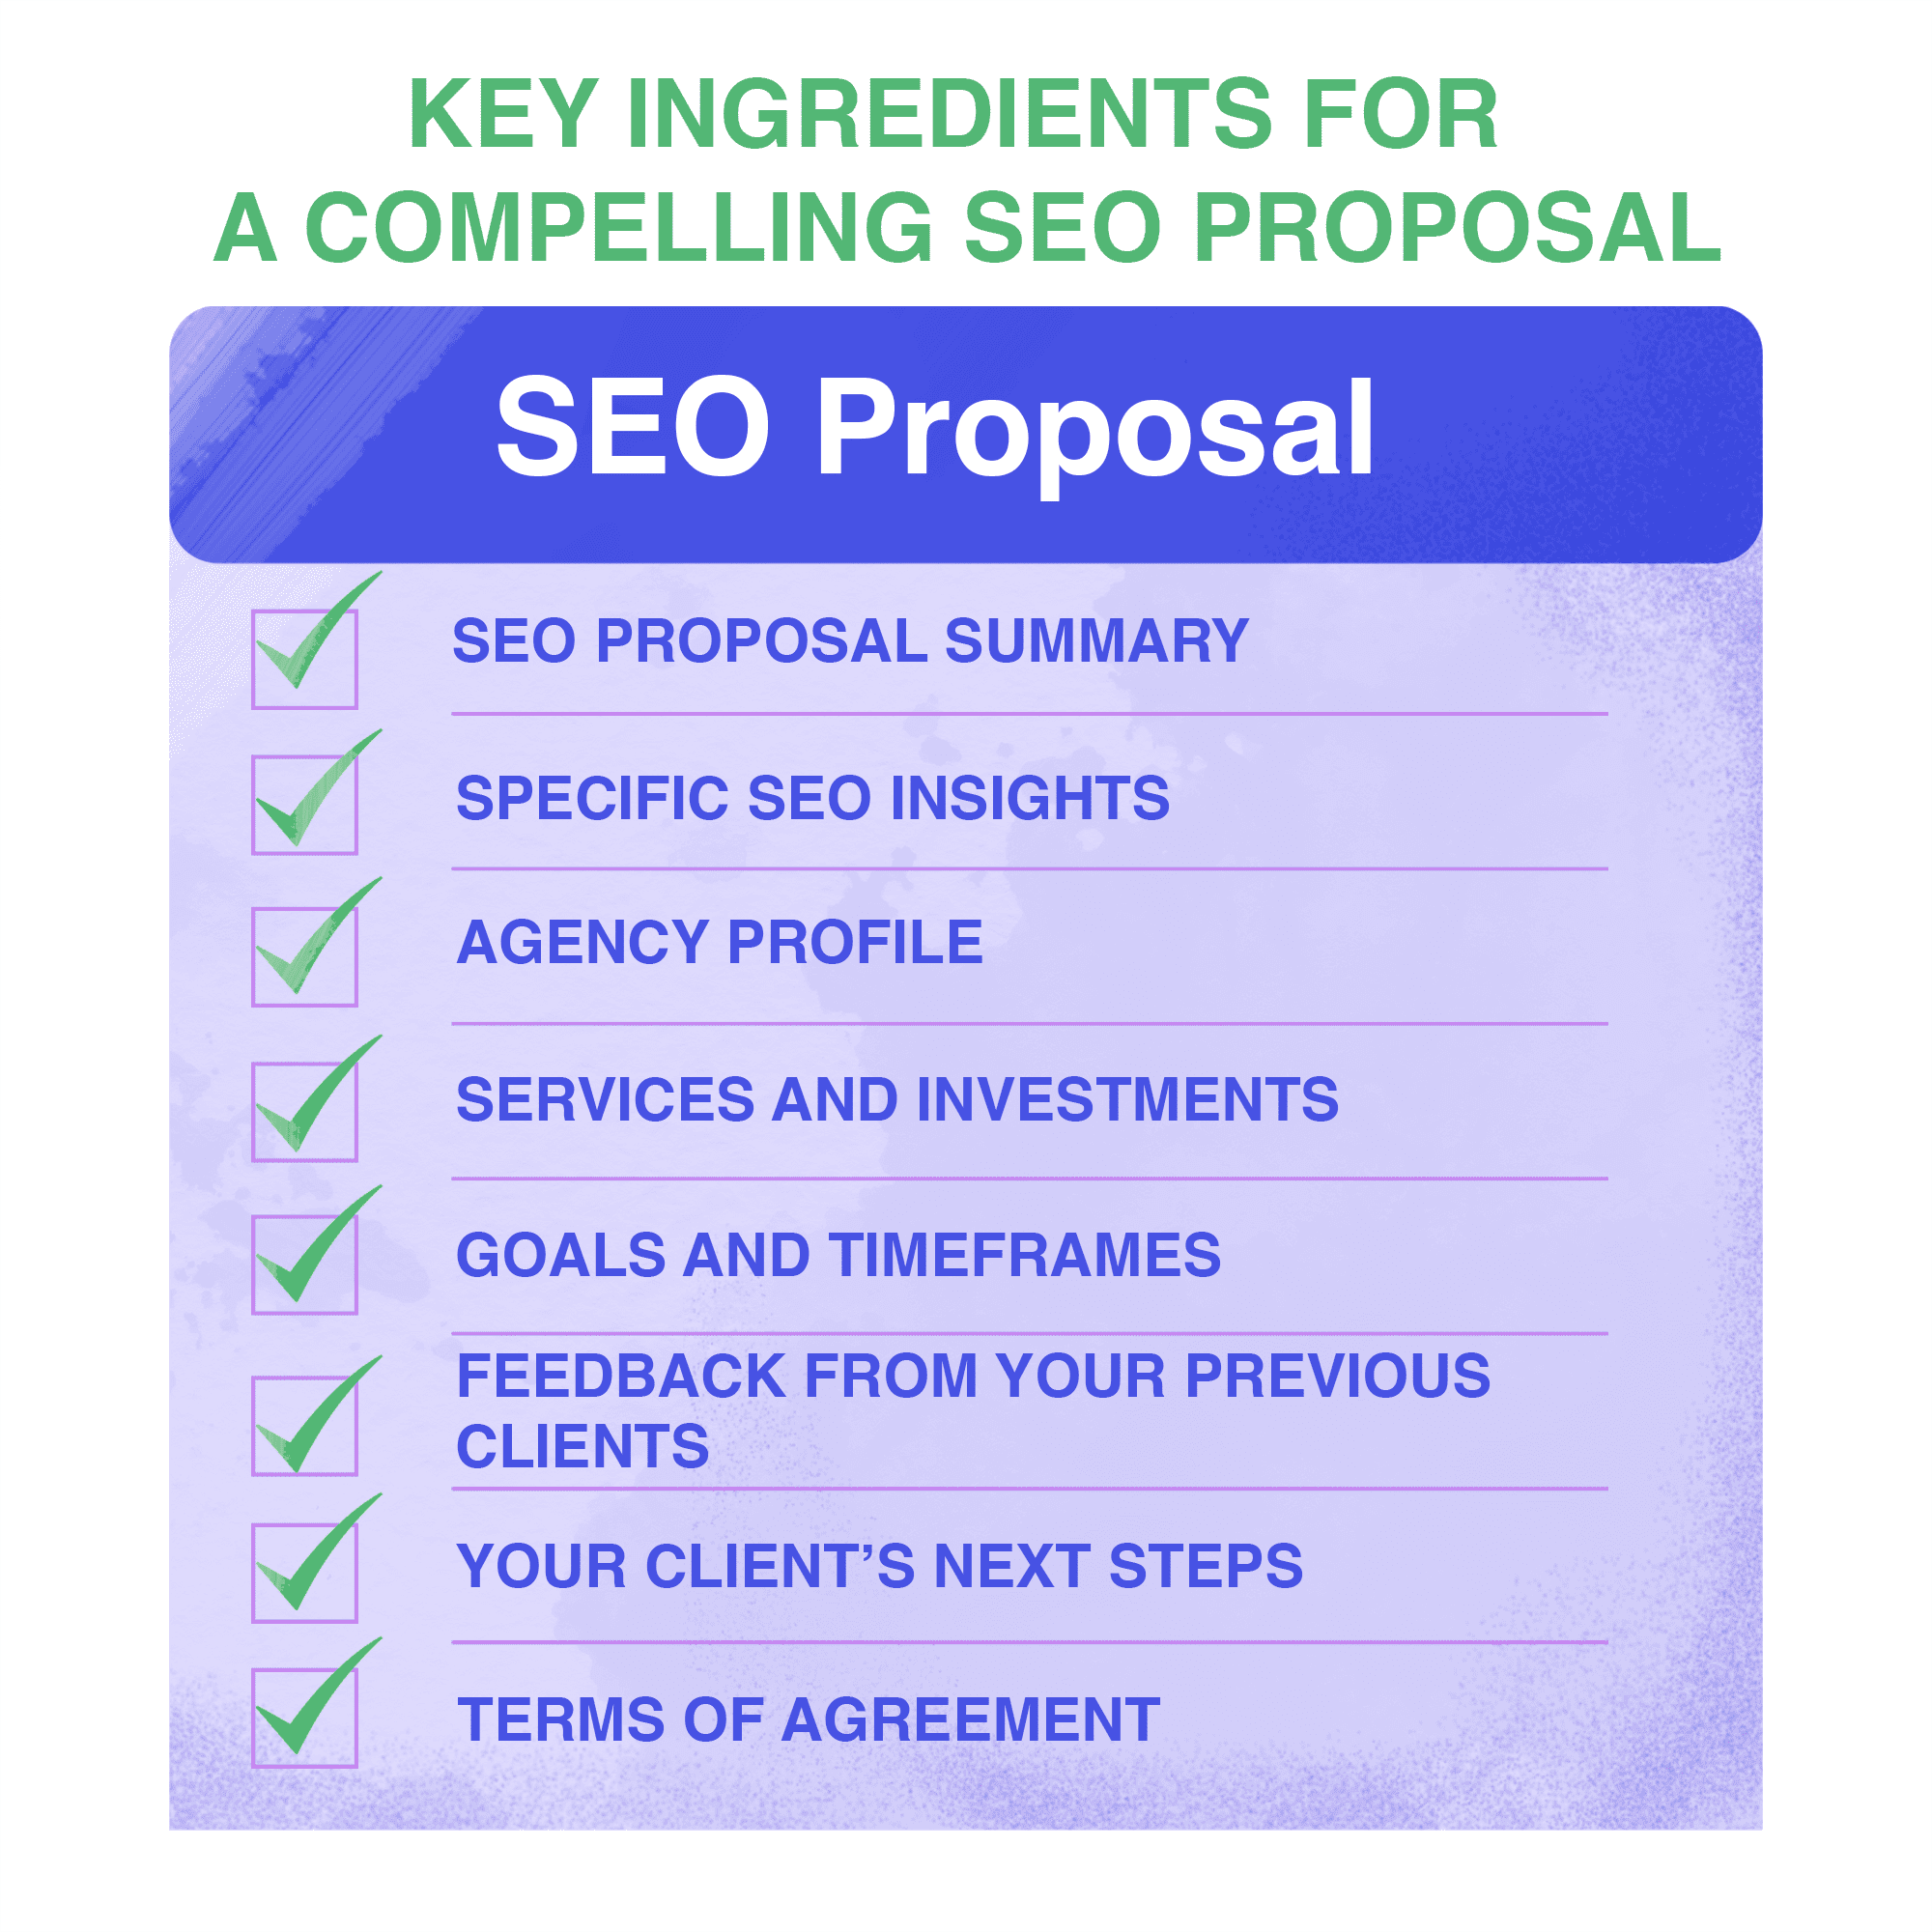 What to include in SEO proposal